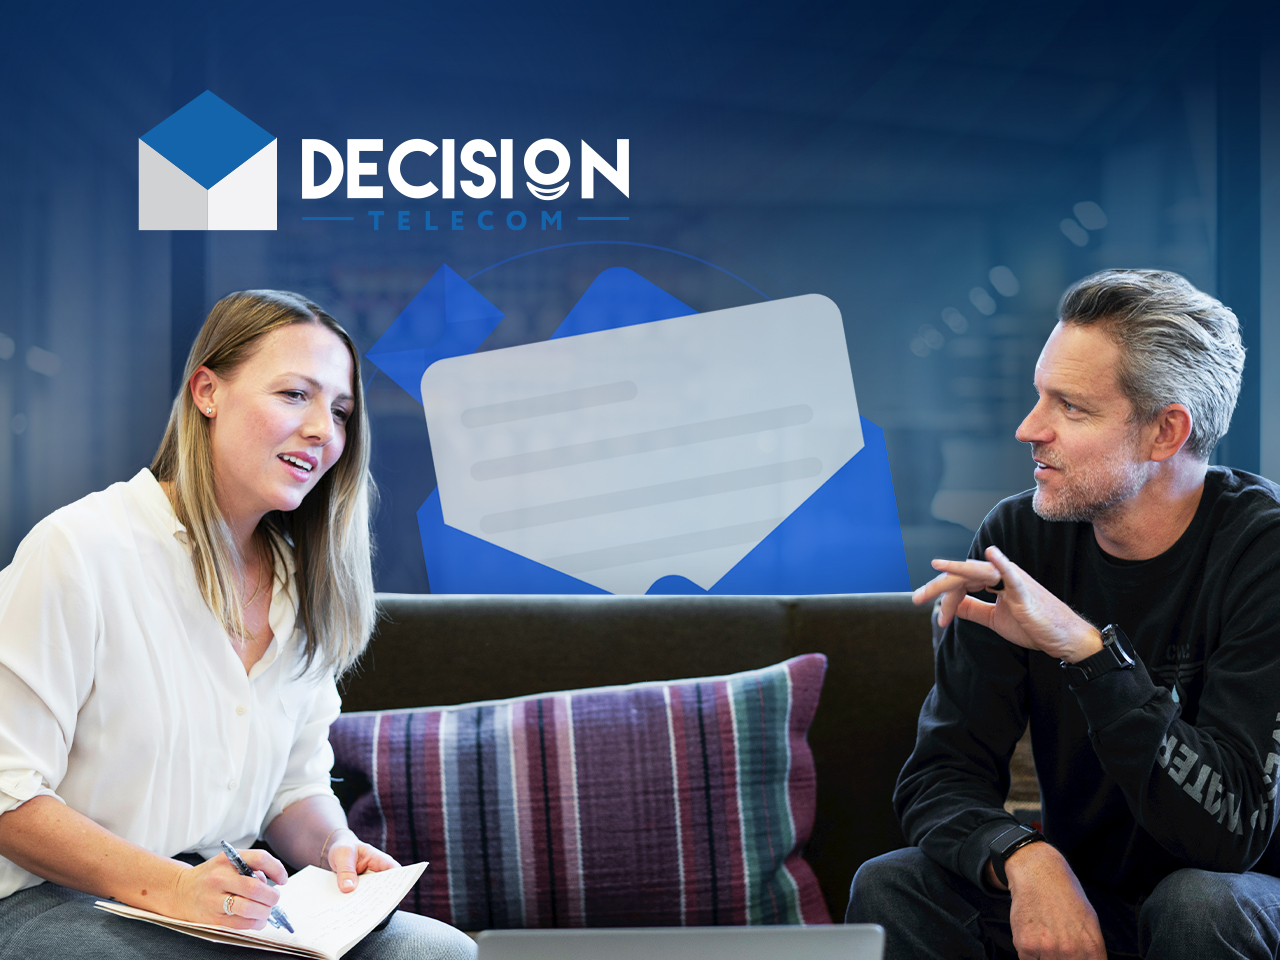 Omnichannel Support from Decision Telecom — the Foundation of Quality Customer Service